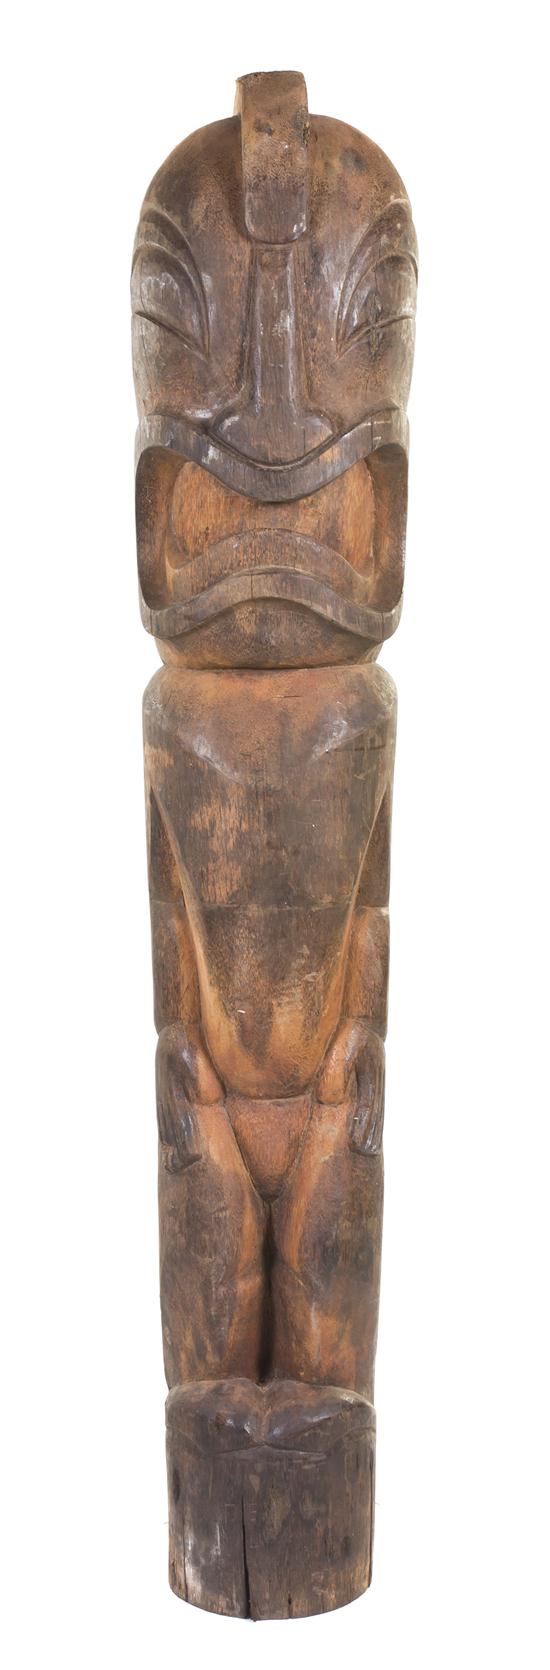 A Carved Wood Tiki depicted upright 1554c7